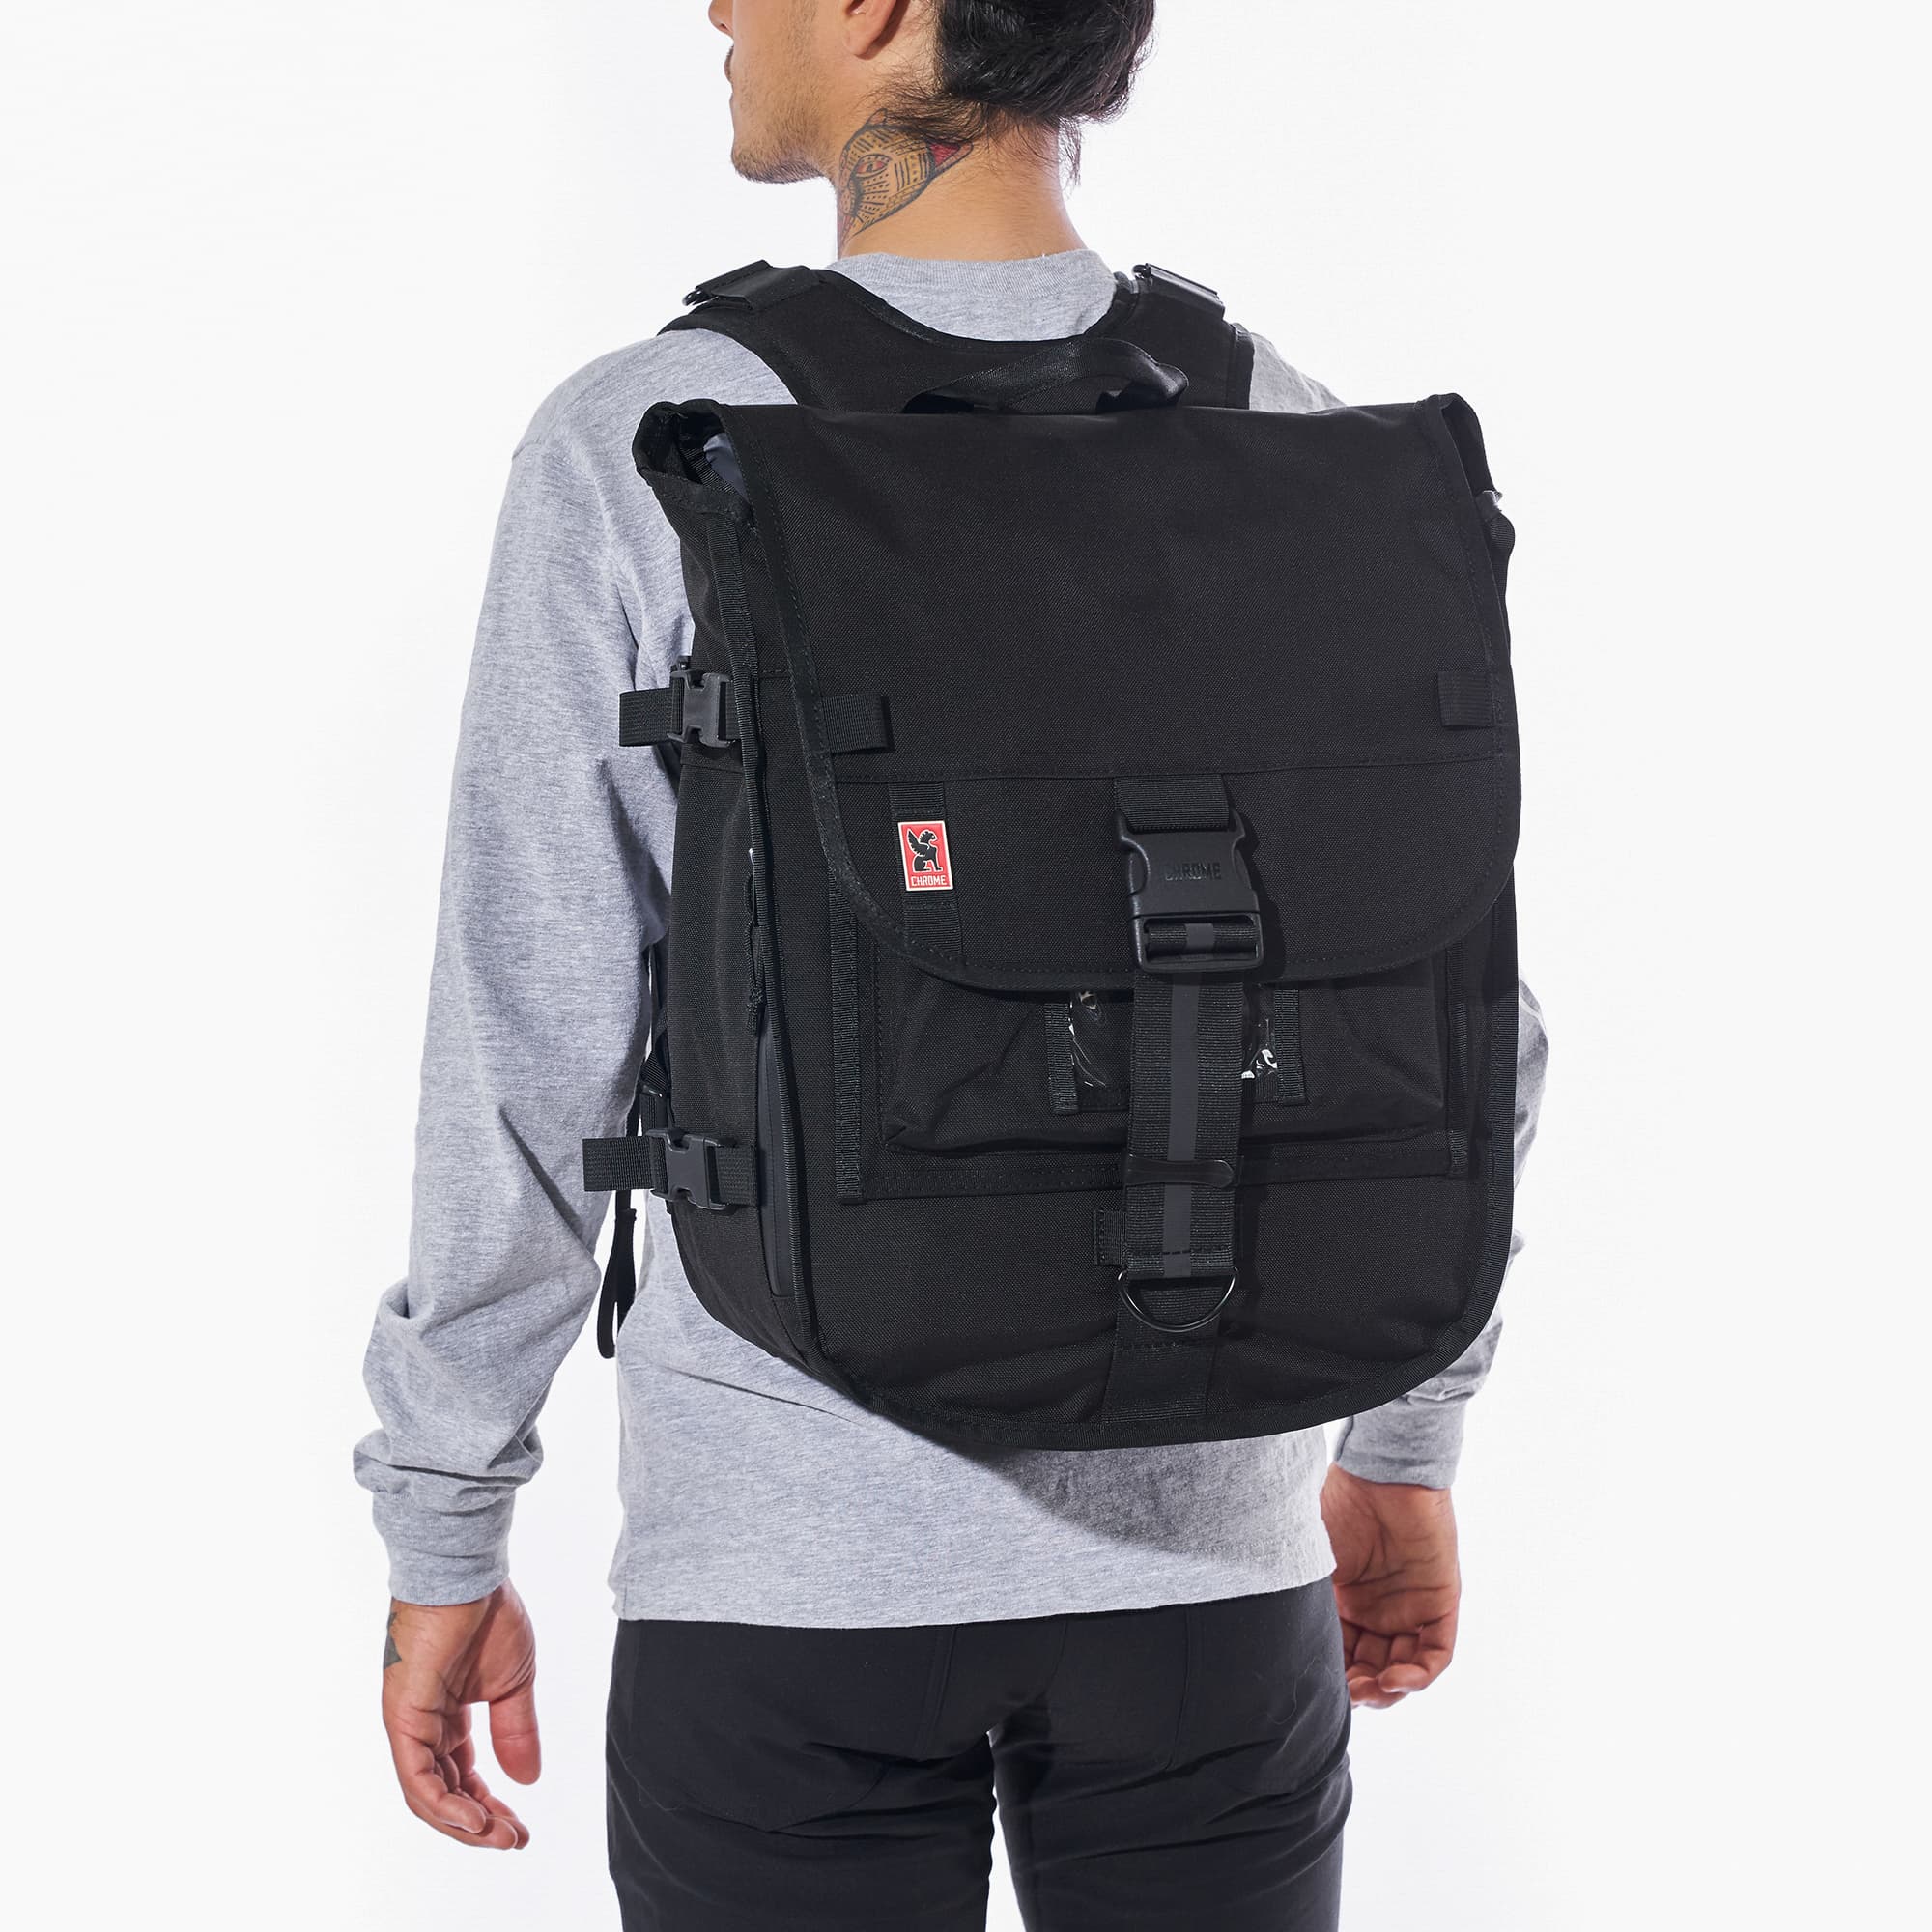 Warsaw medium size flap backpack in black worn by a man